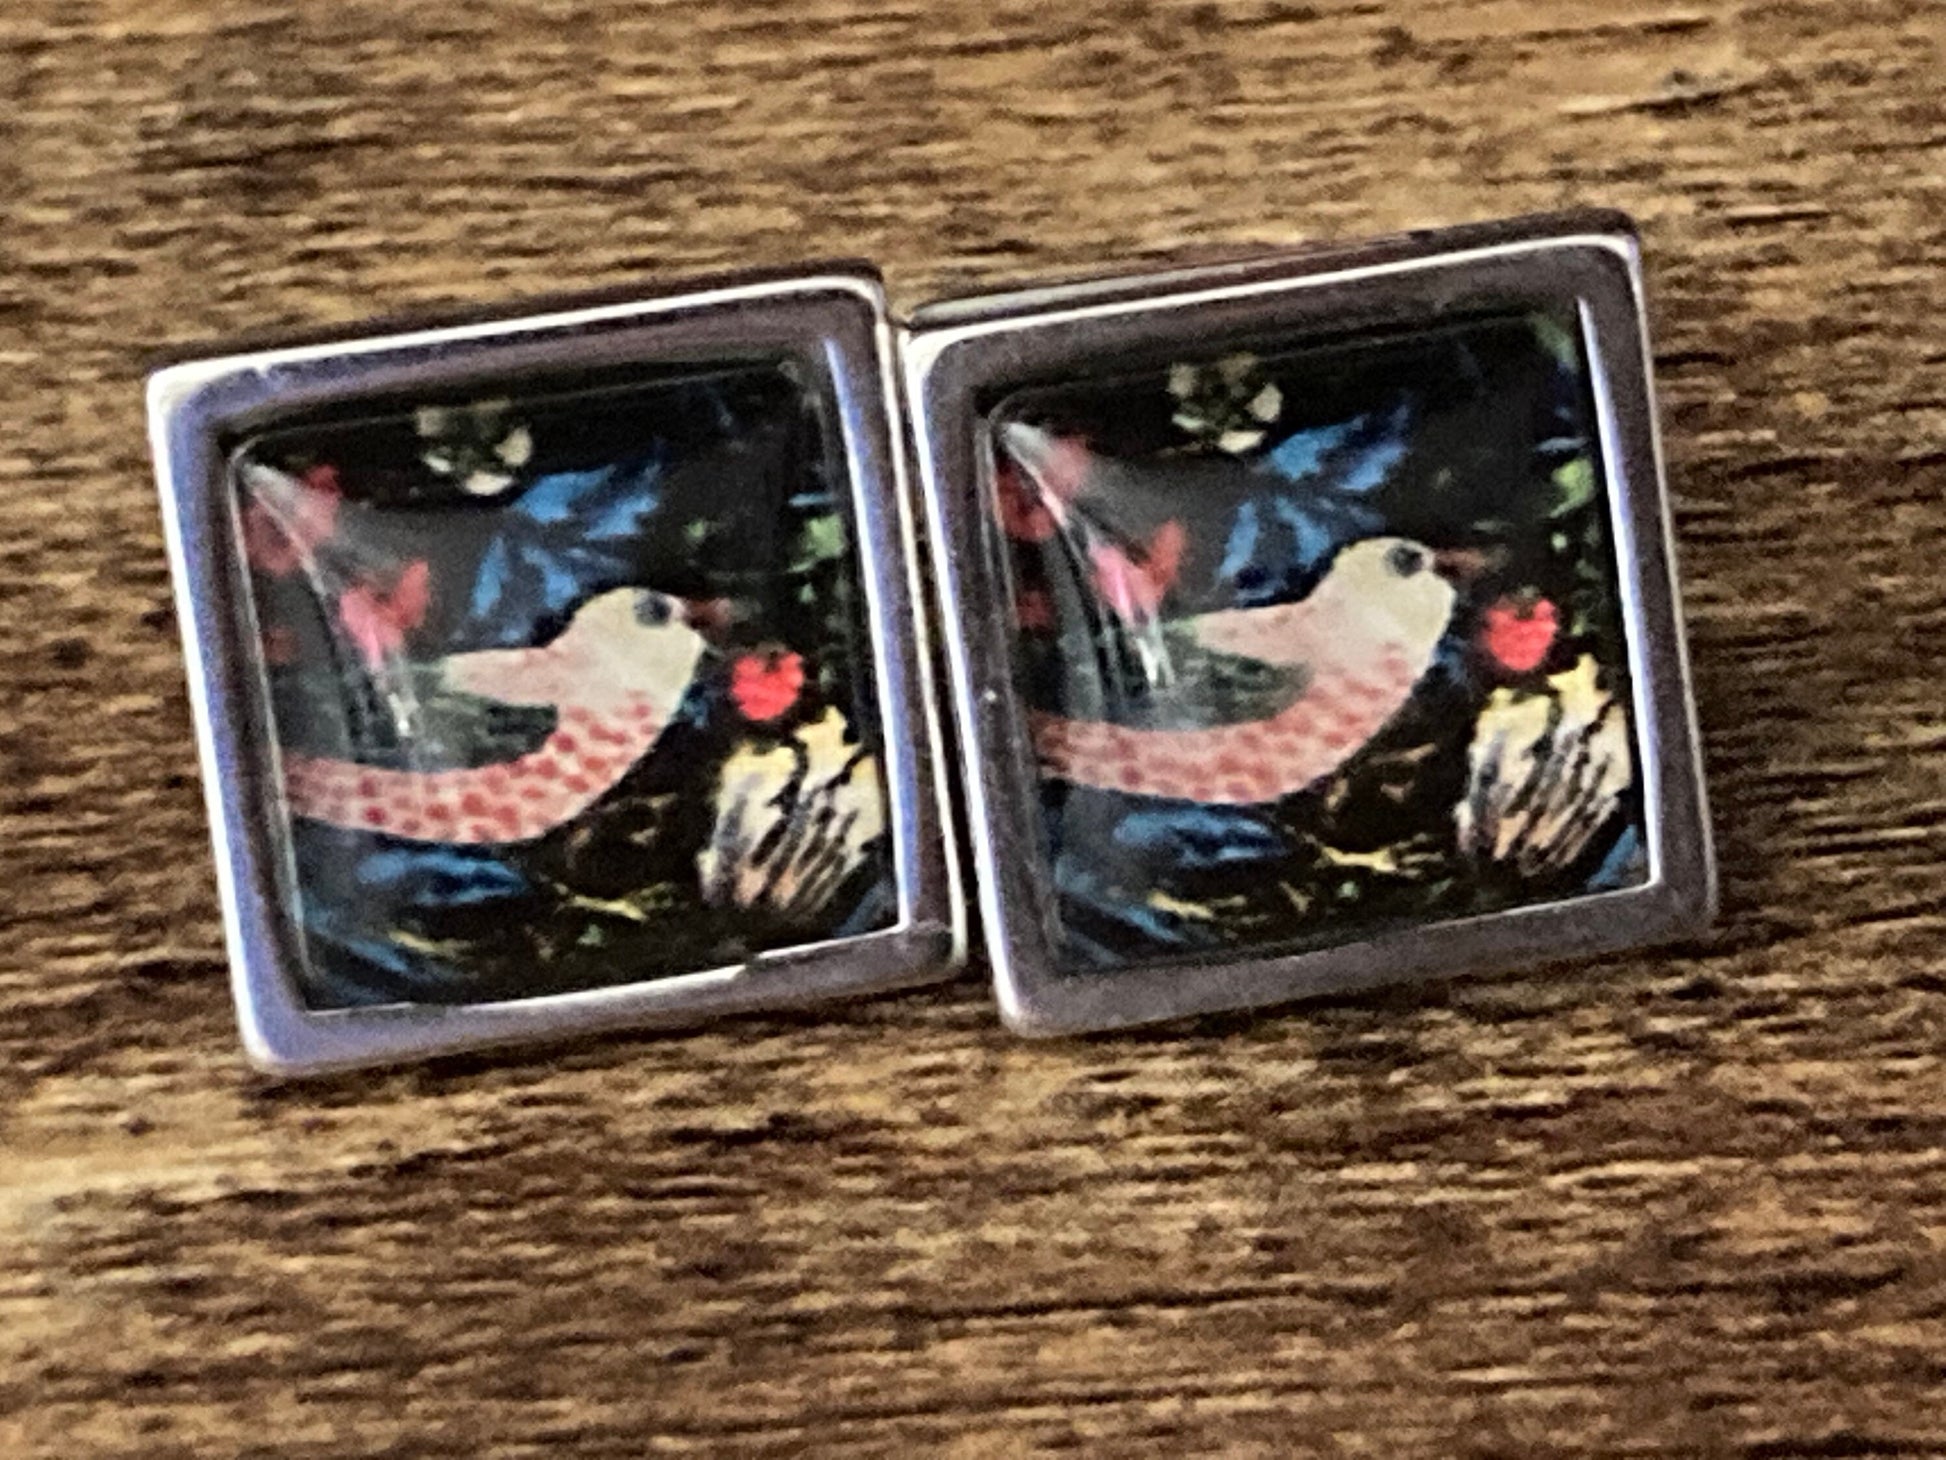 Strawberry thief earrings stainless steel 1.5cm square William Morris print glass studs